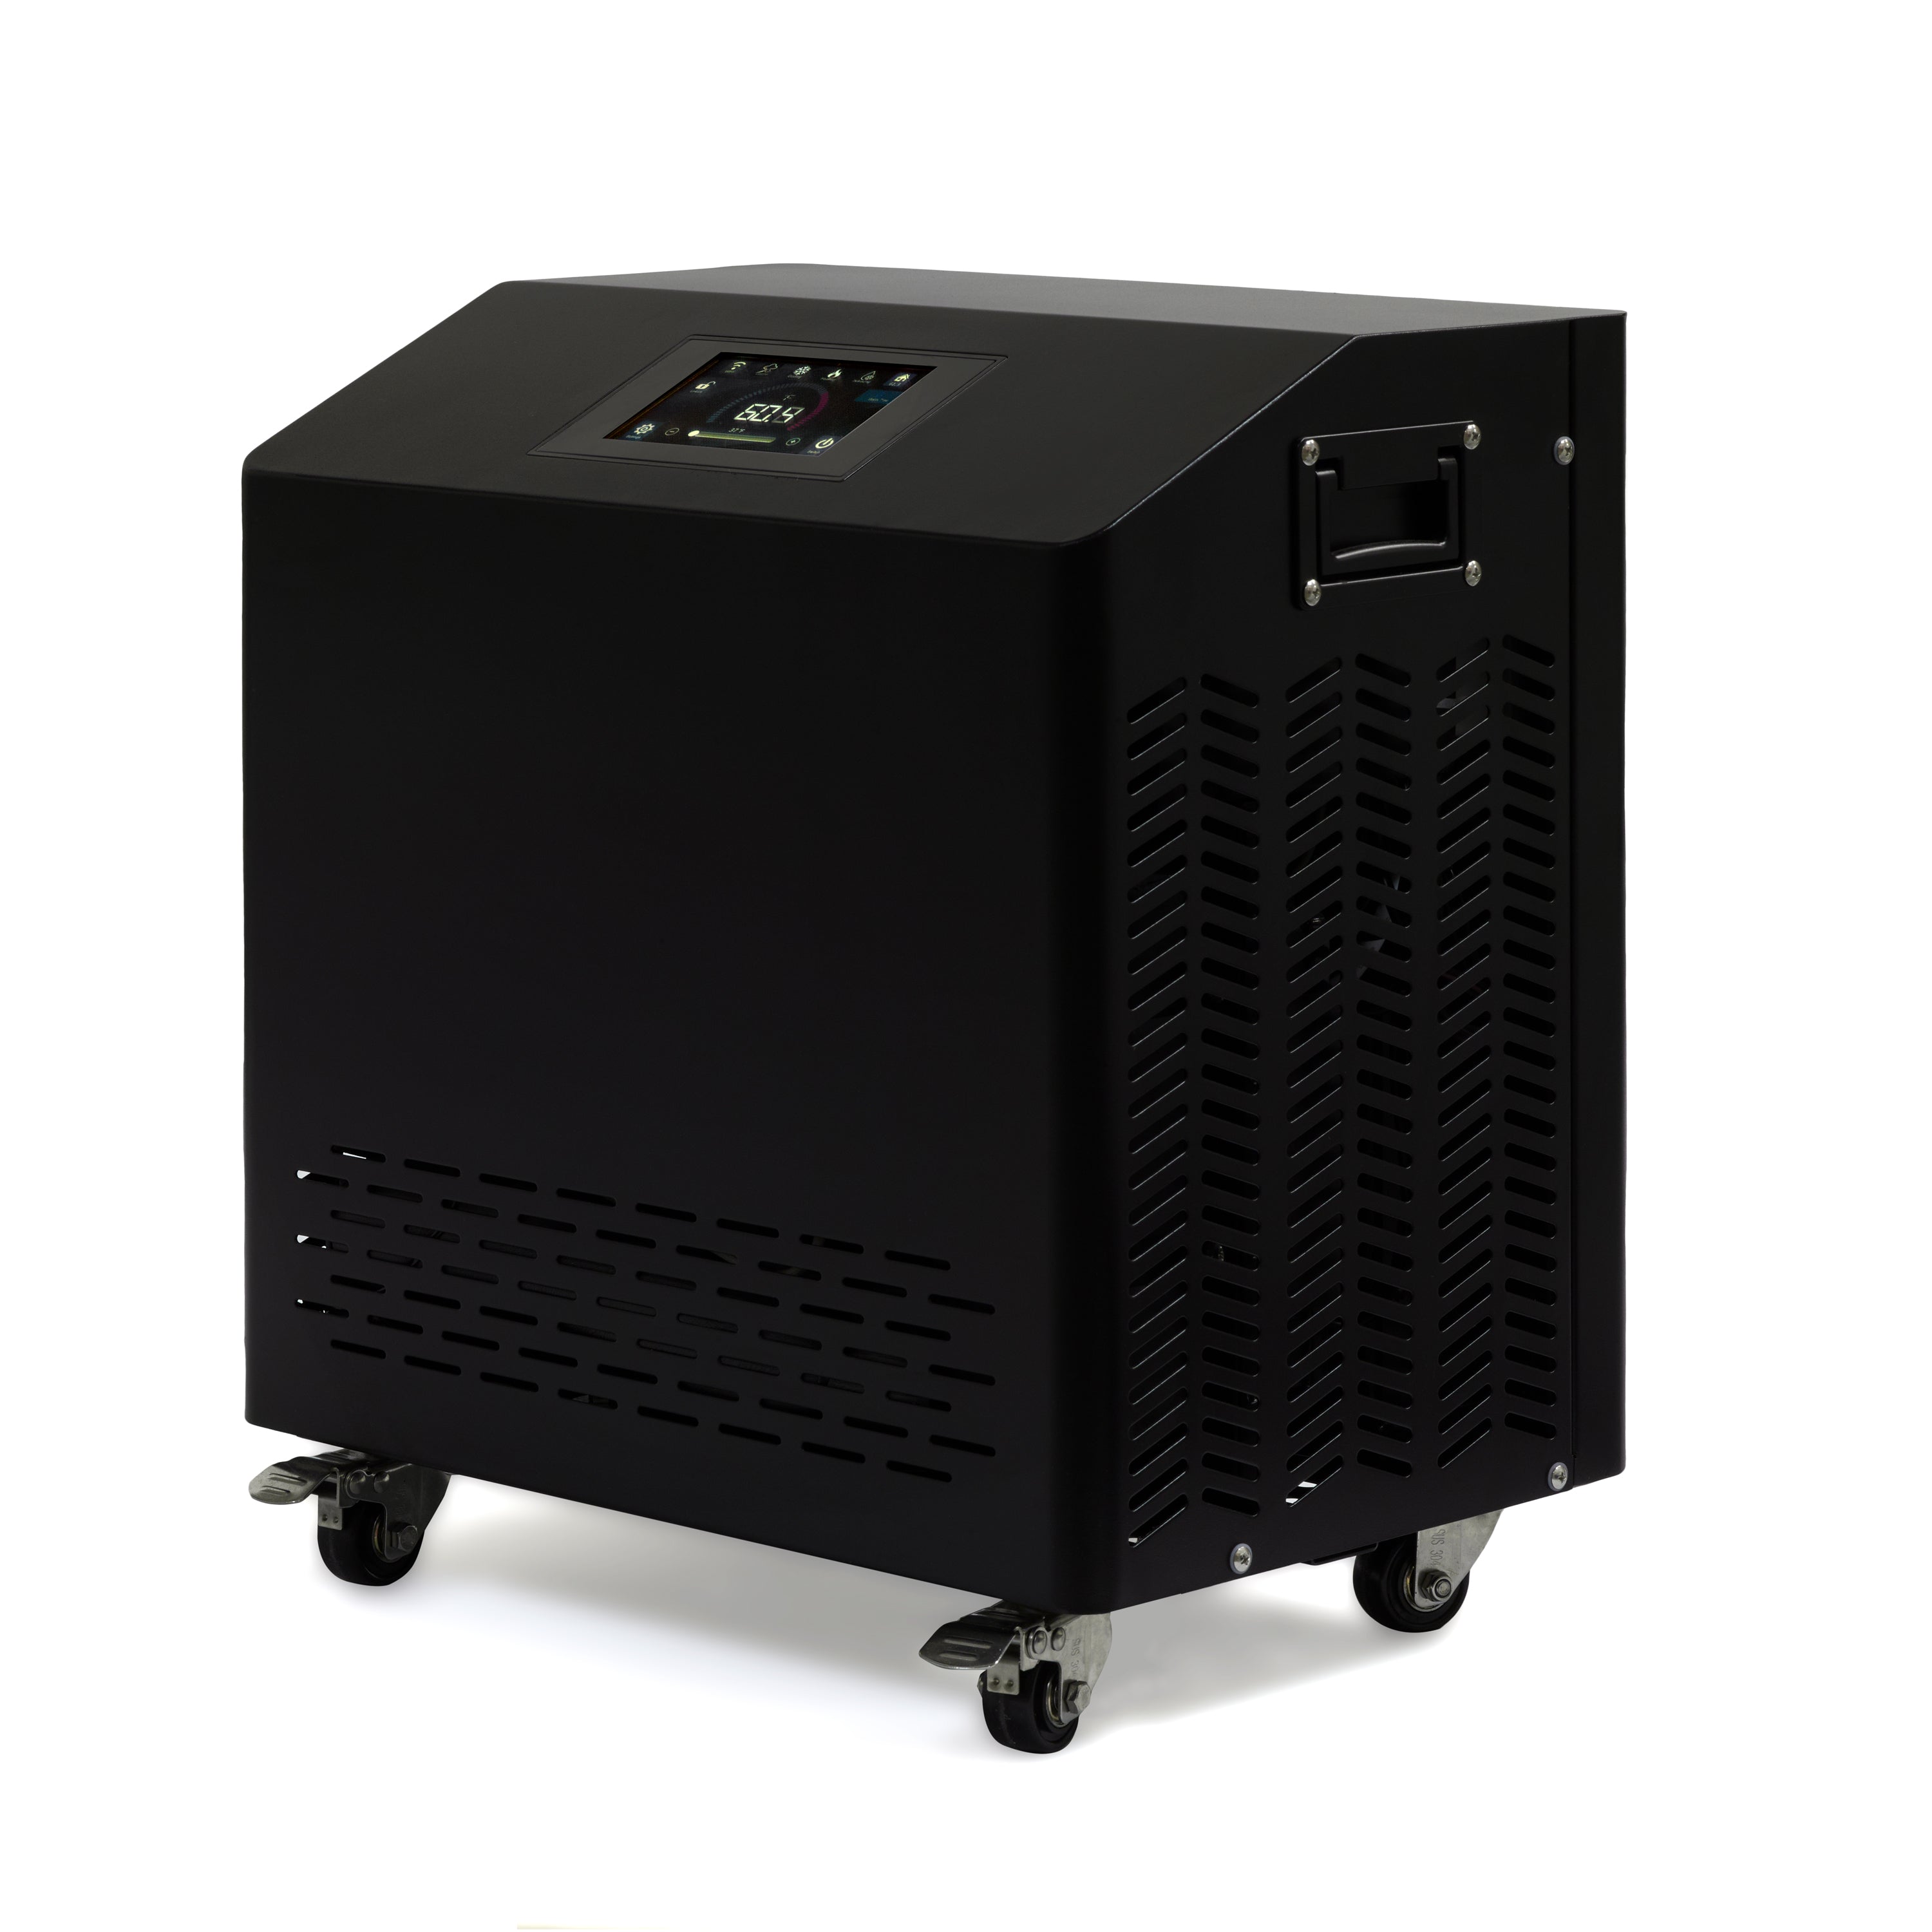 DCT - 0.6 HP Cold/Heat System with WIFI APP